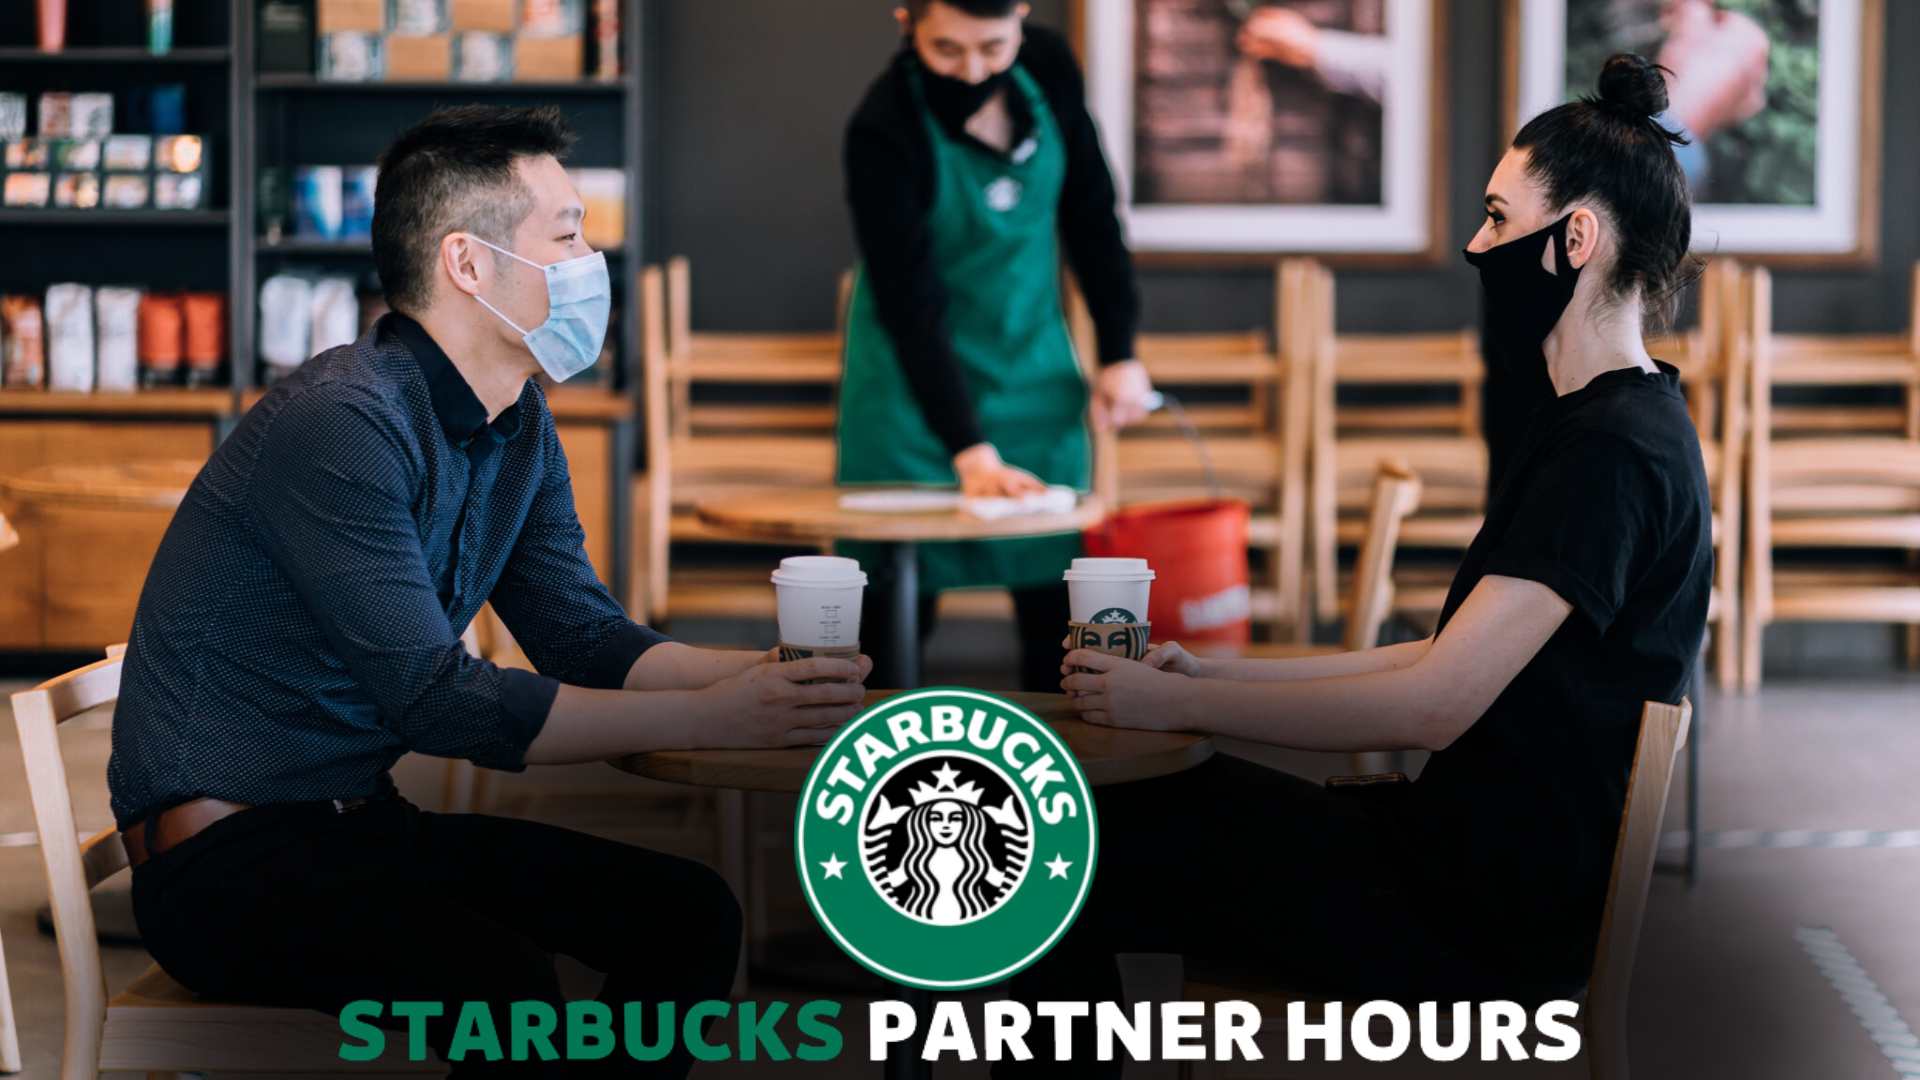 How to Use Partner Discounts on the Starbucks App